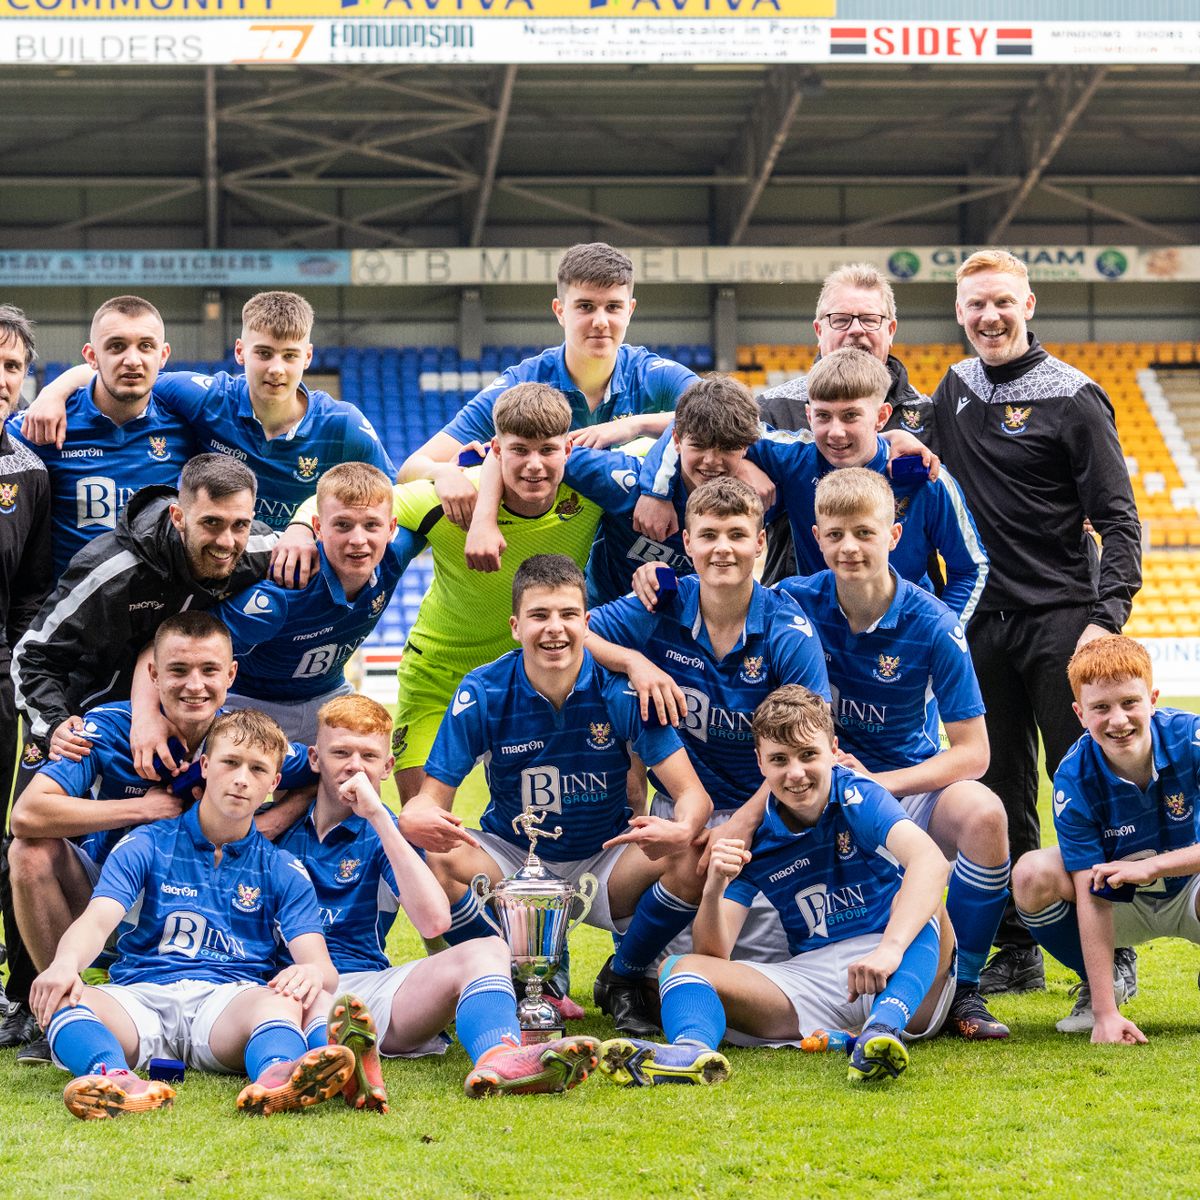 St Johnstone youths spark special celebratory scenes at McDiarmid Park by winning national silverware - Daily Record